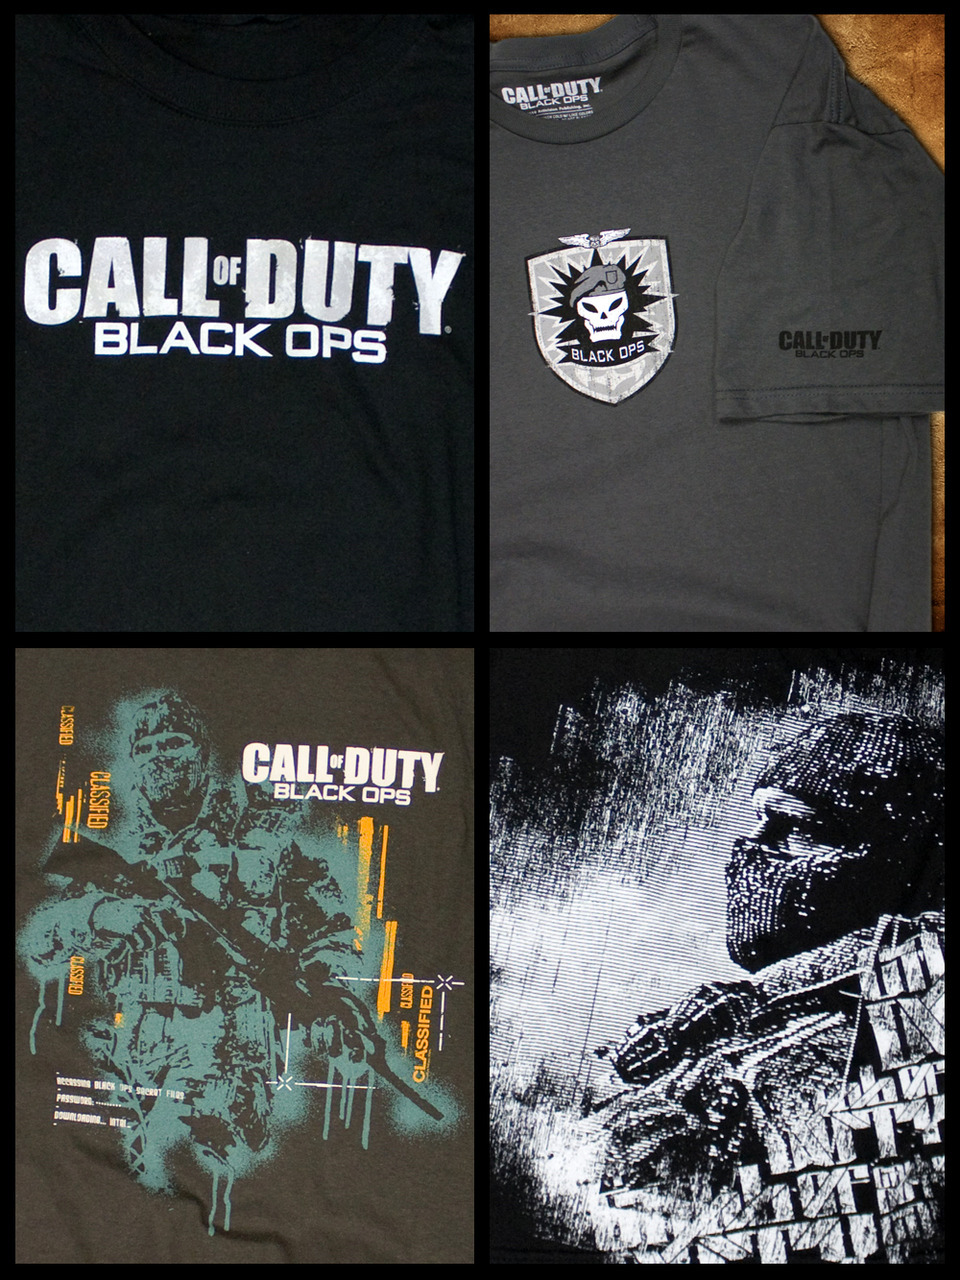 Four new Call of Duty: Black Ops shirts available at J!NX. If you buy any CoD shirt, get $5 off any other shirt with the code “DEATHMACHINE”!
Call of Duty: Black Ops Tees via J!NX